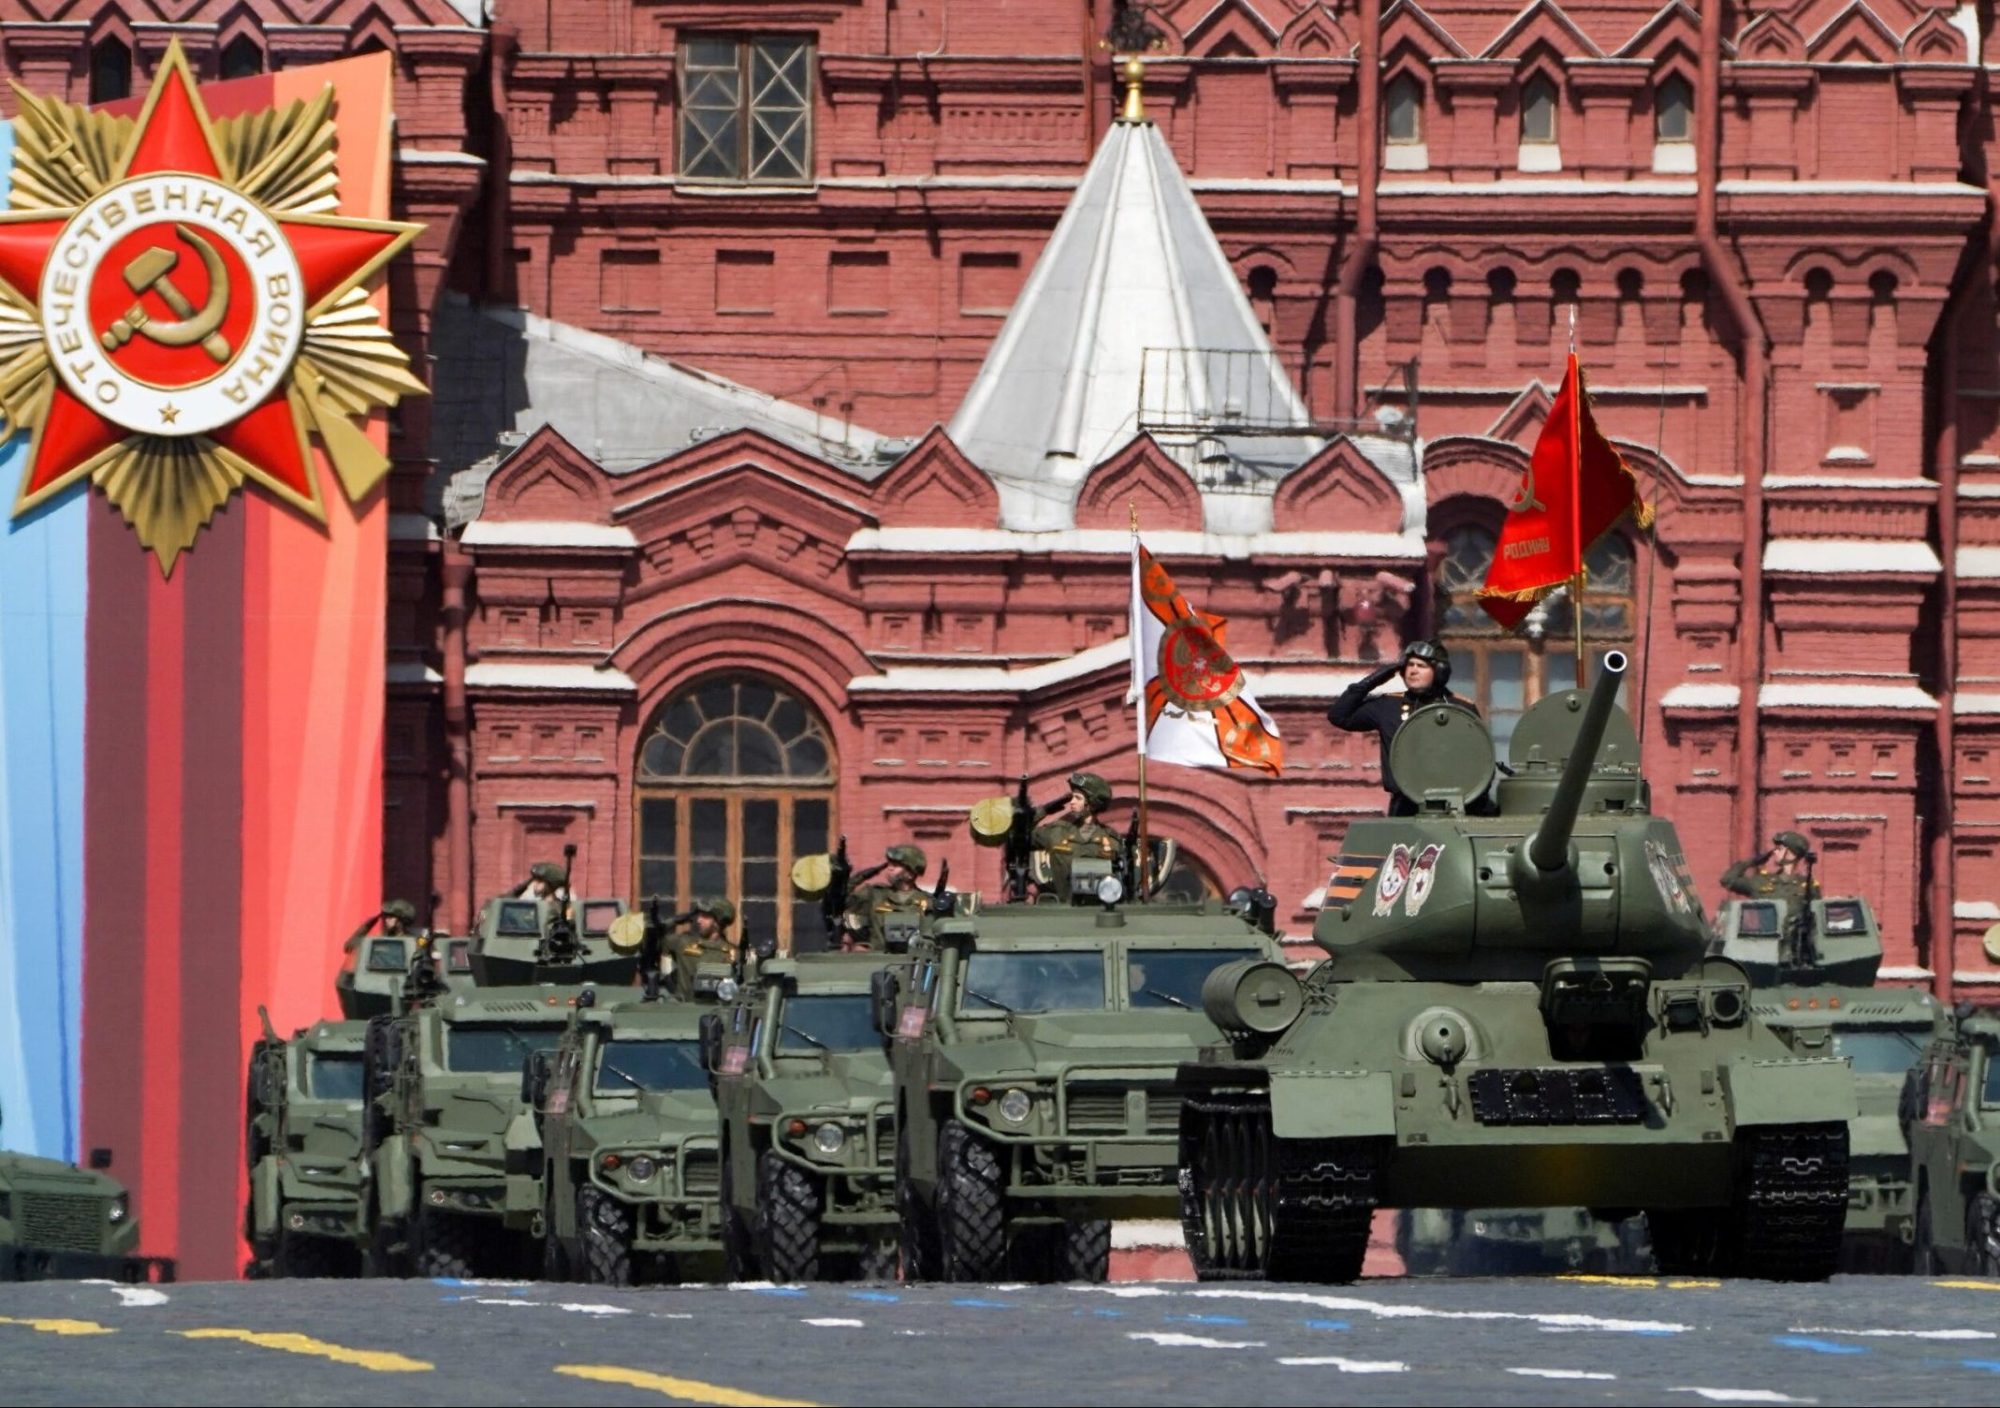 Putin's embarrassing one-tank parade hints at catastrophic losses